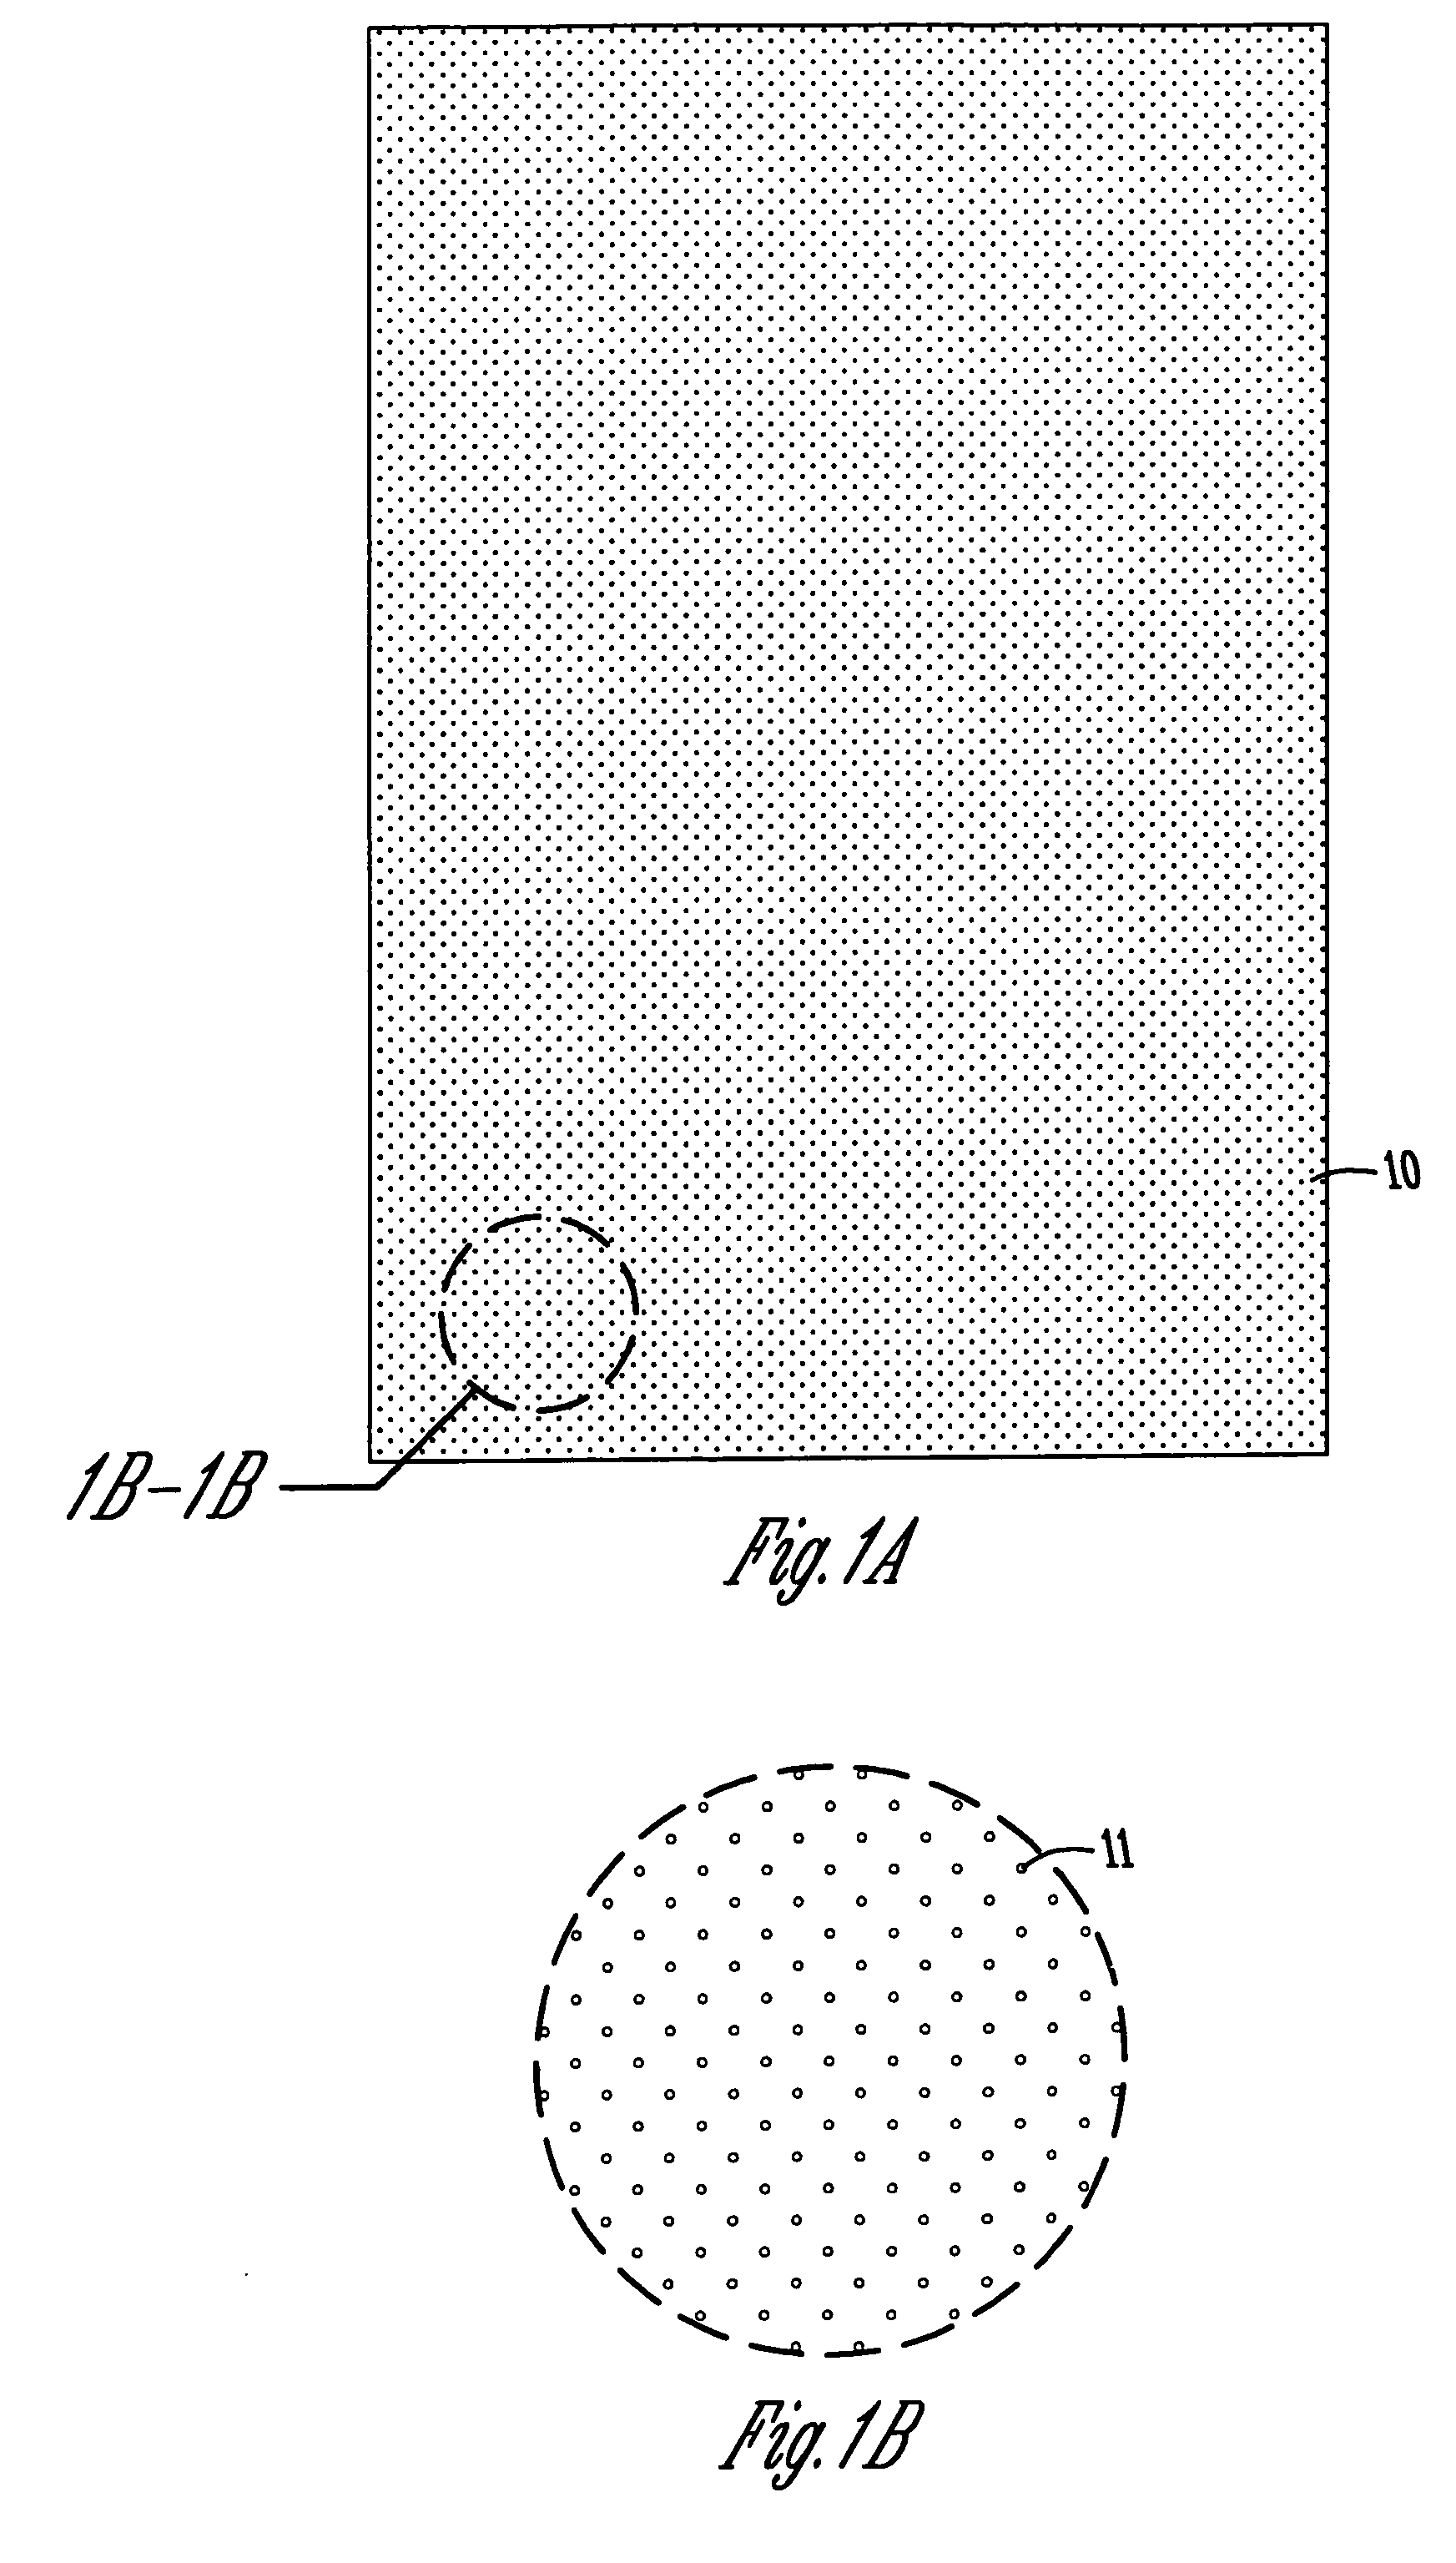 Apparatus and method for reducing hydrofoil cavitation